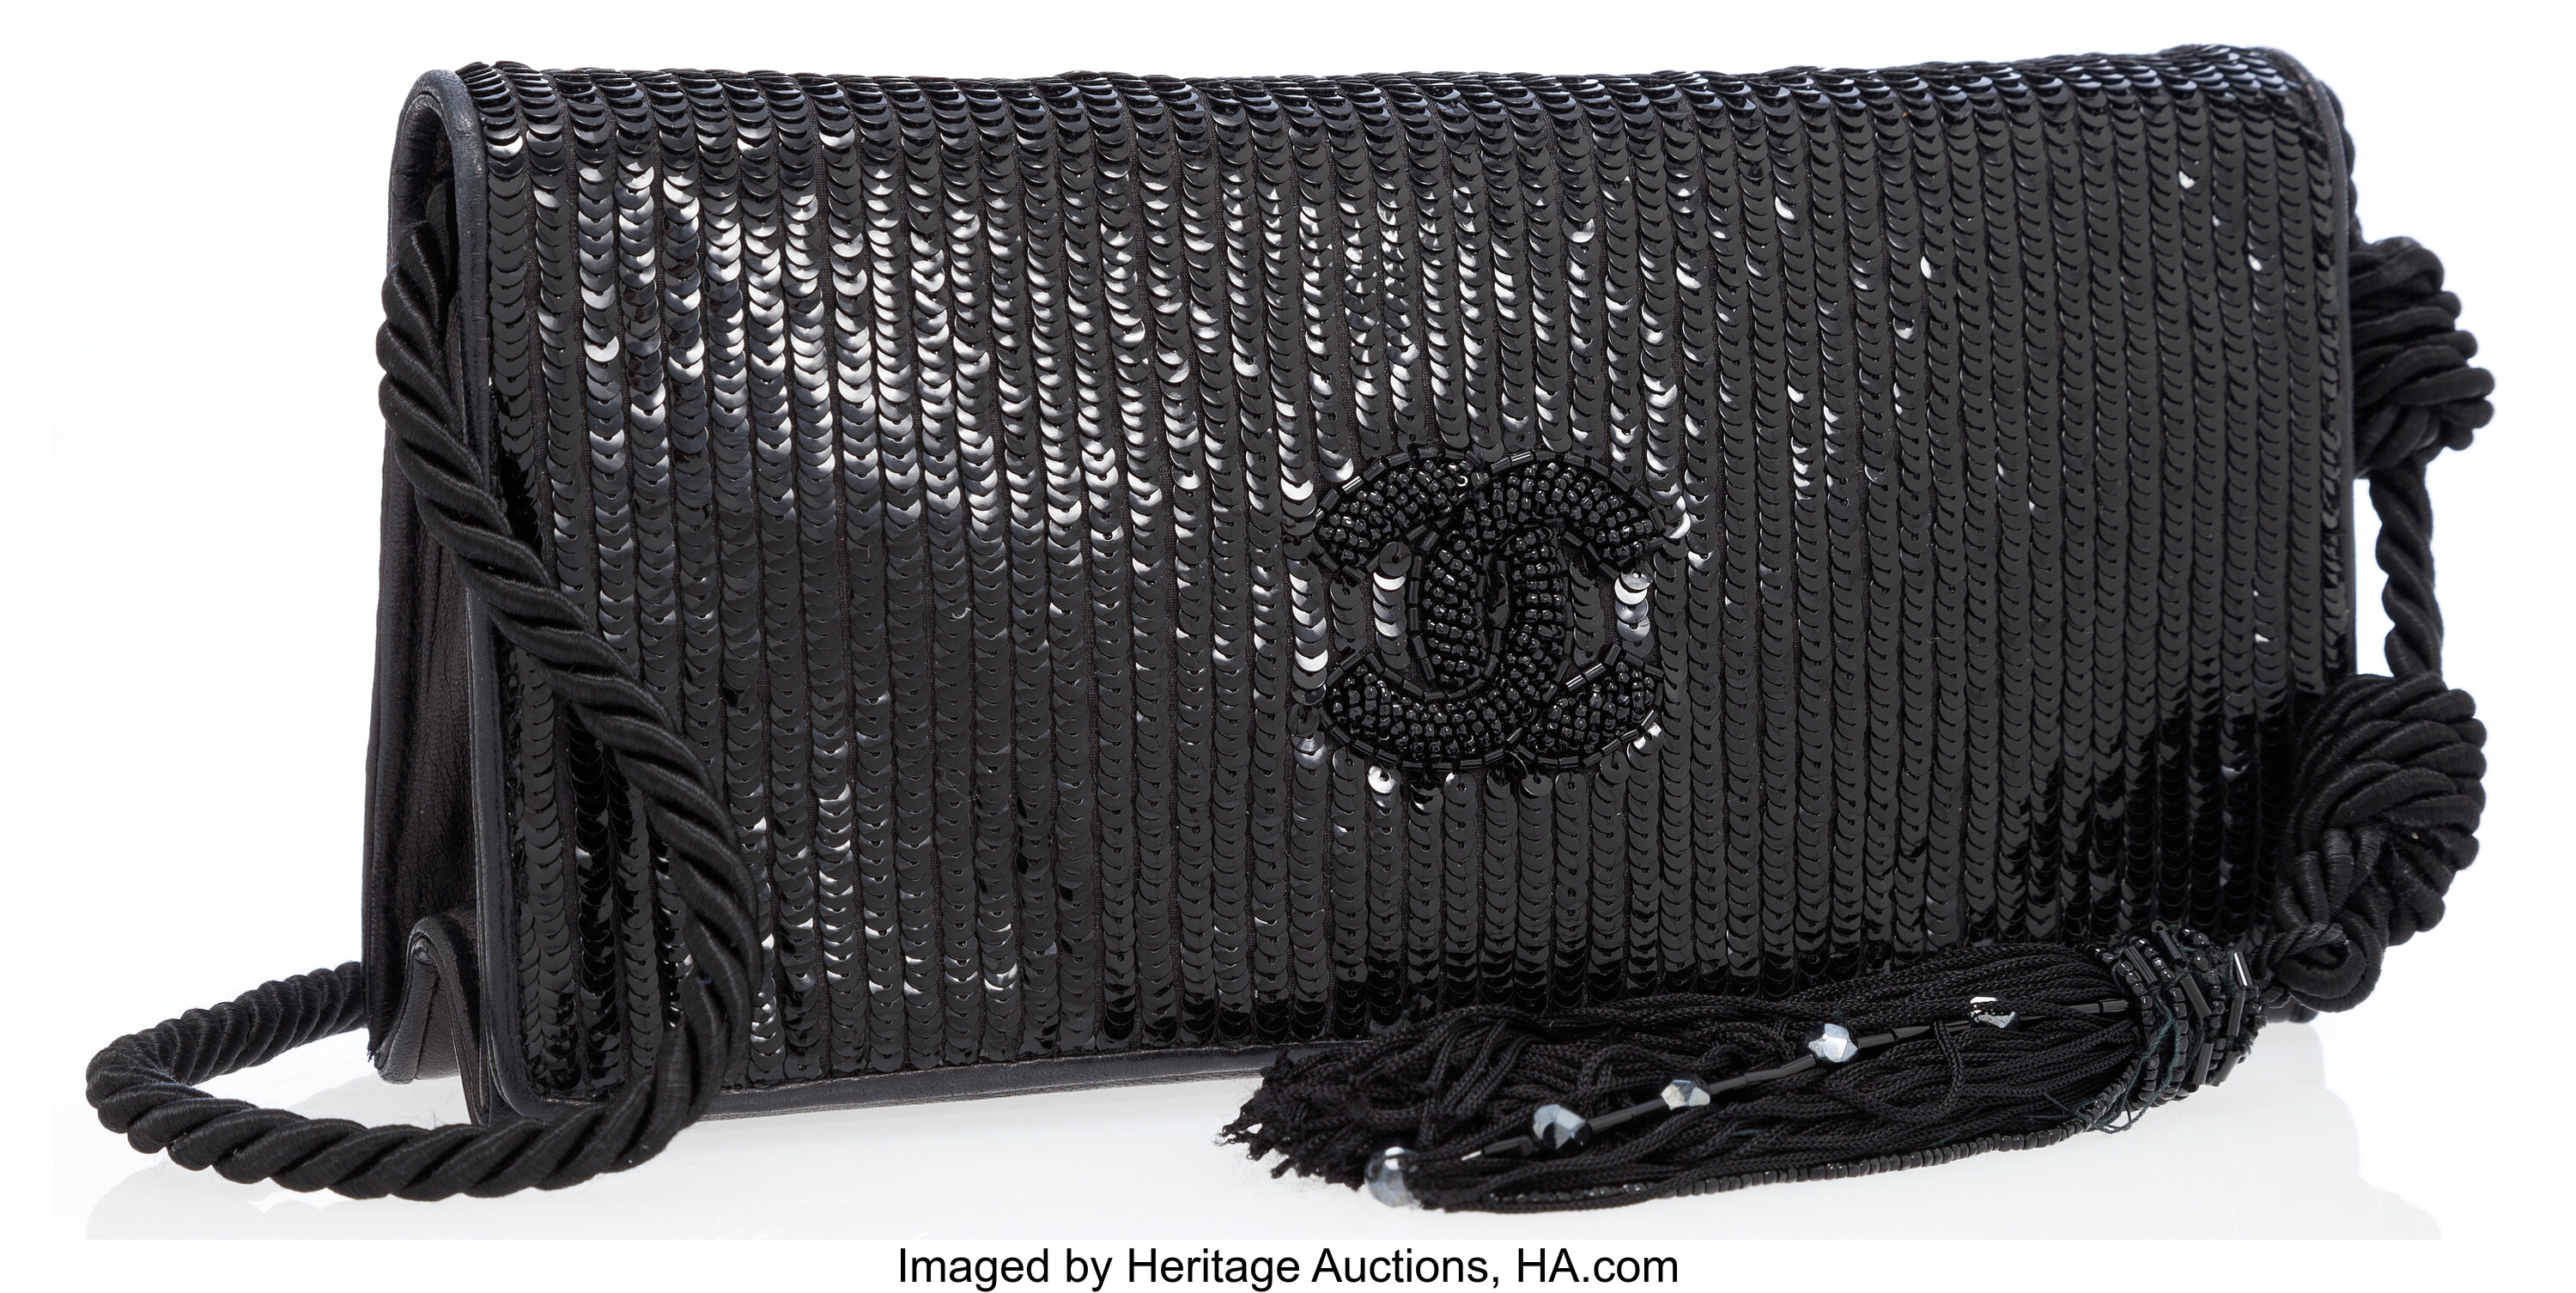 Chanel Black Lambskin Leather & Sequin Clutch Bag with Black Rope